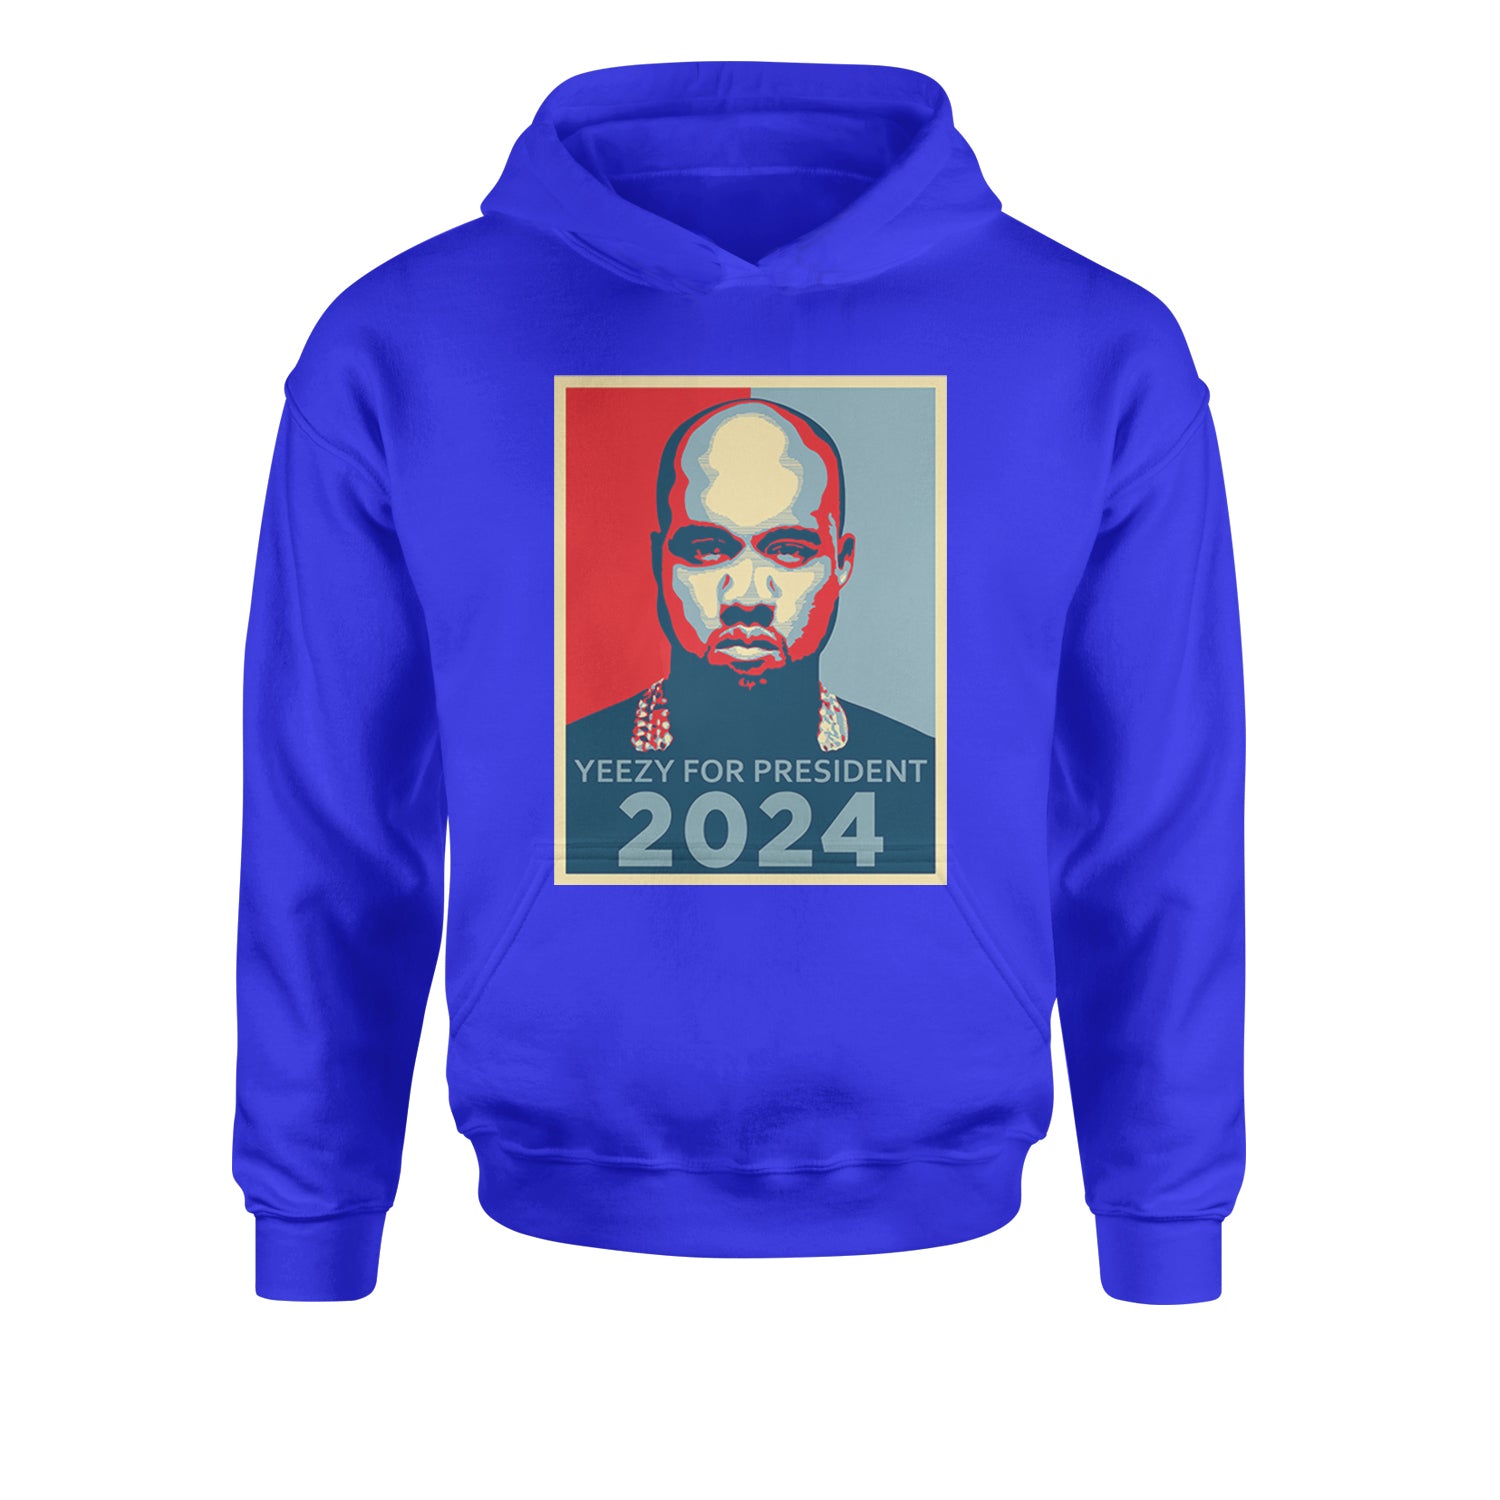 Yeezus For President Vote for Ye Youth-Sized Hoodie Royal Blue